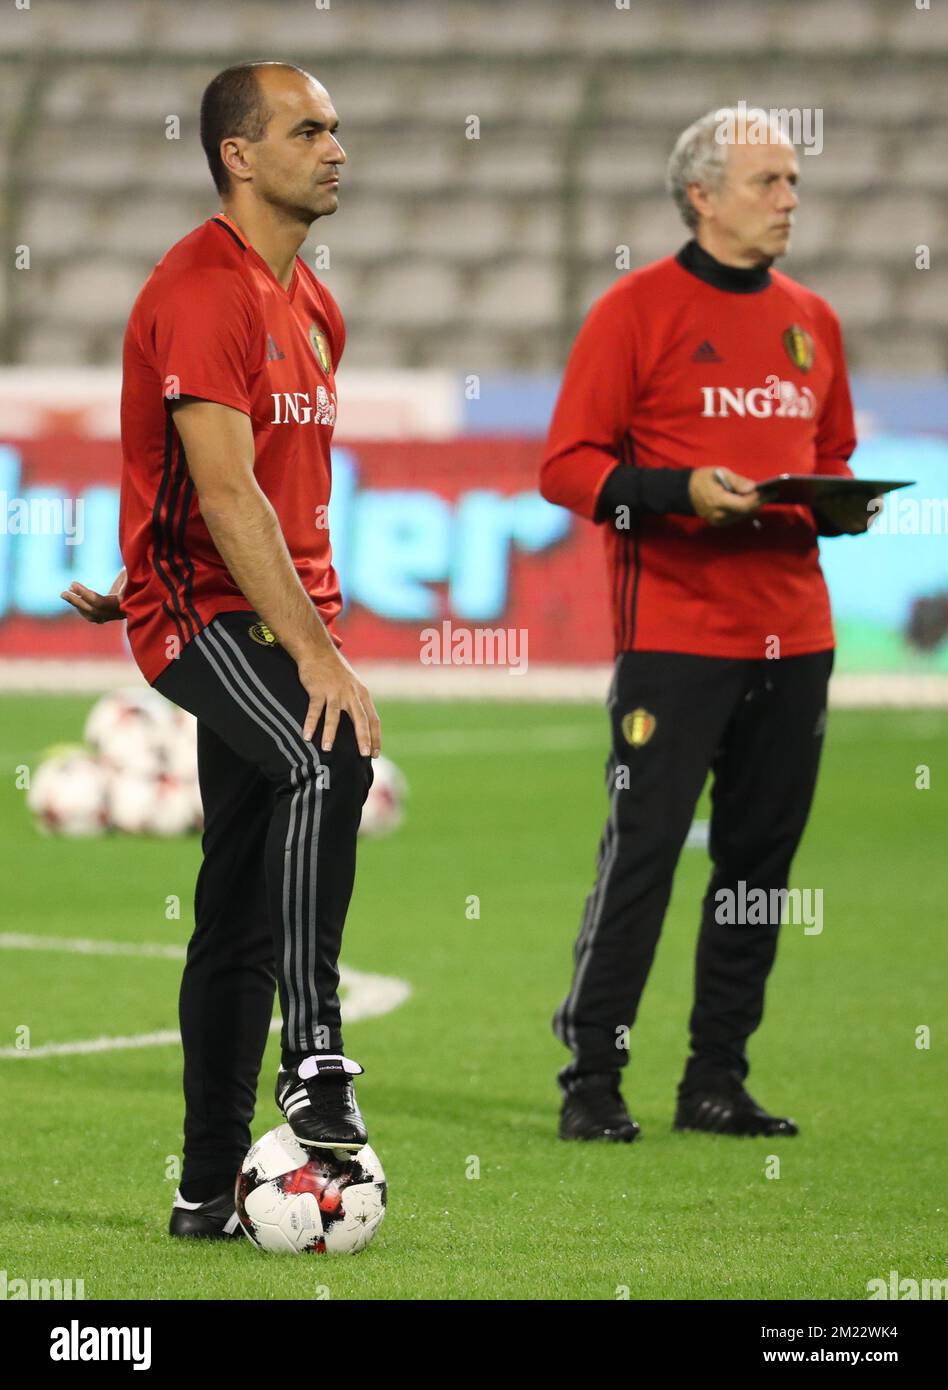 Spain's Javi Martinez and Belgium's video analyst Herman Landtsheer pictured during a training session of Belgian national soccer team Red Devils, on Wednesday 31 August 2016, in Brussels. Stock Photo